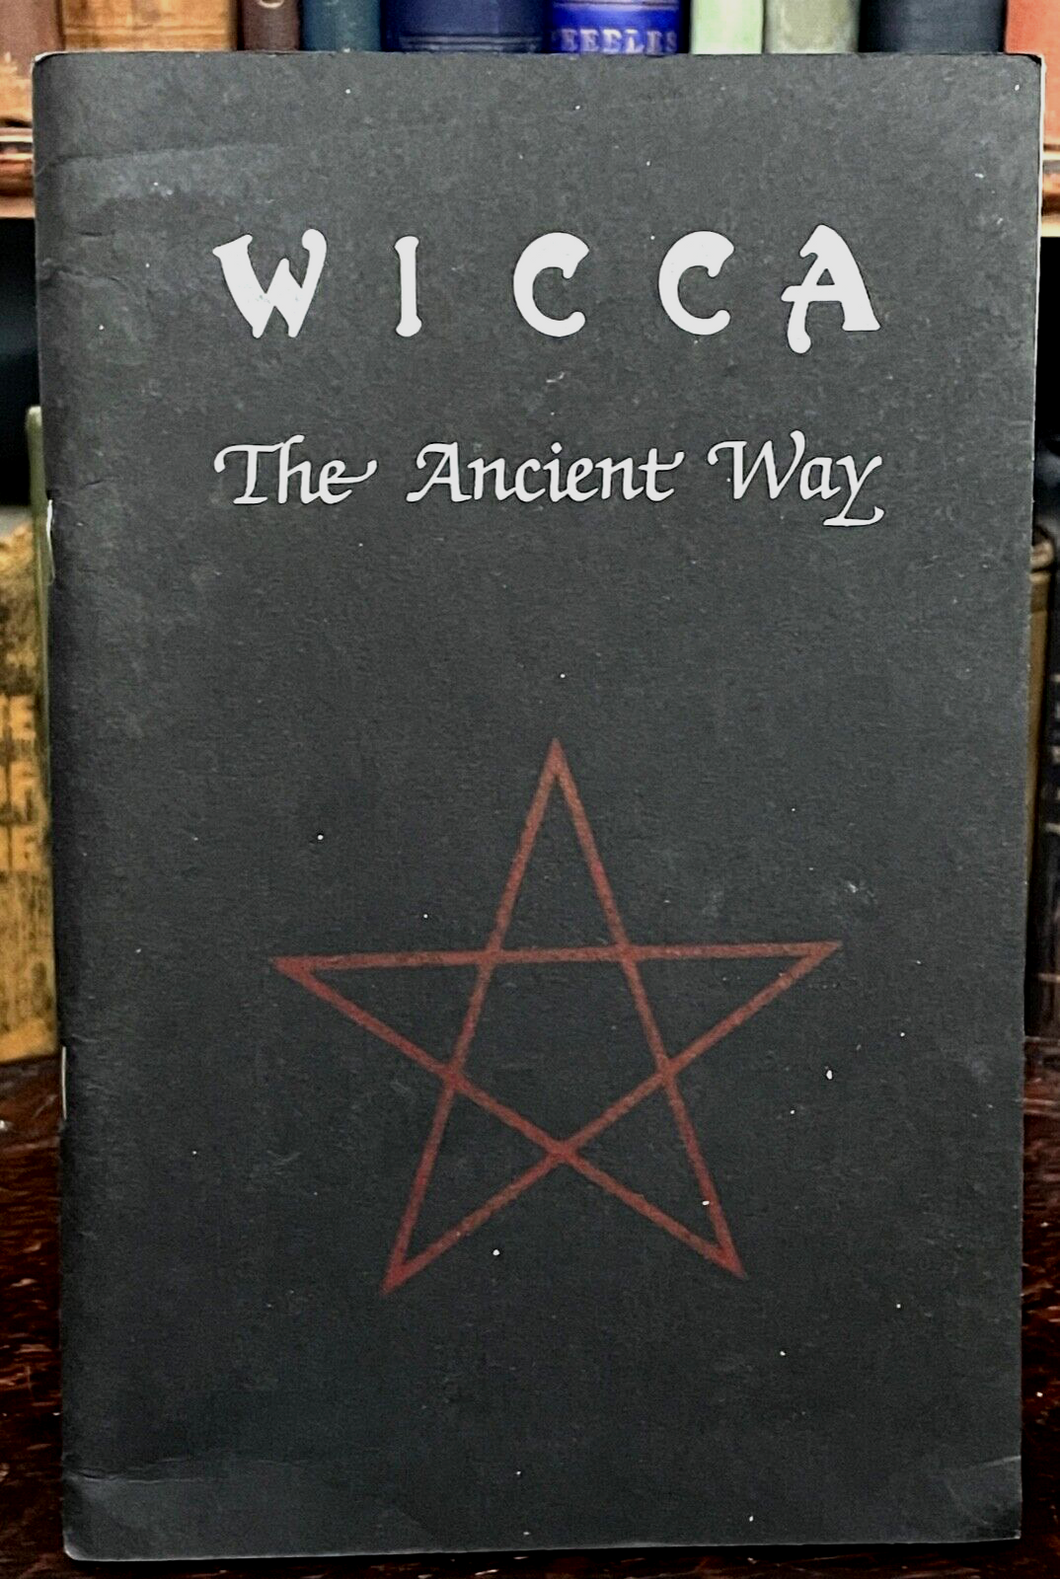 WICCA: THE ANCIENT WAY - Scarce 1st Ed, 1981 - PAGANISM PAGAN WITCHCRAFT MAGICK